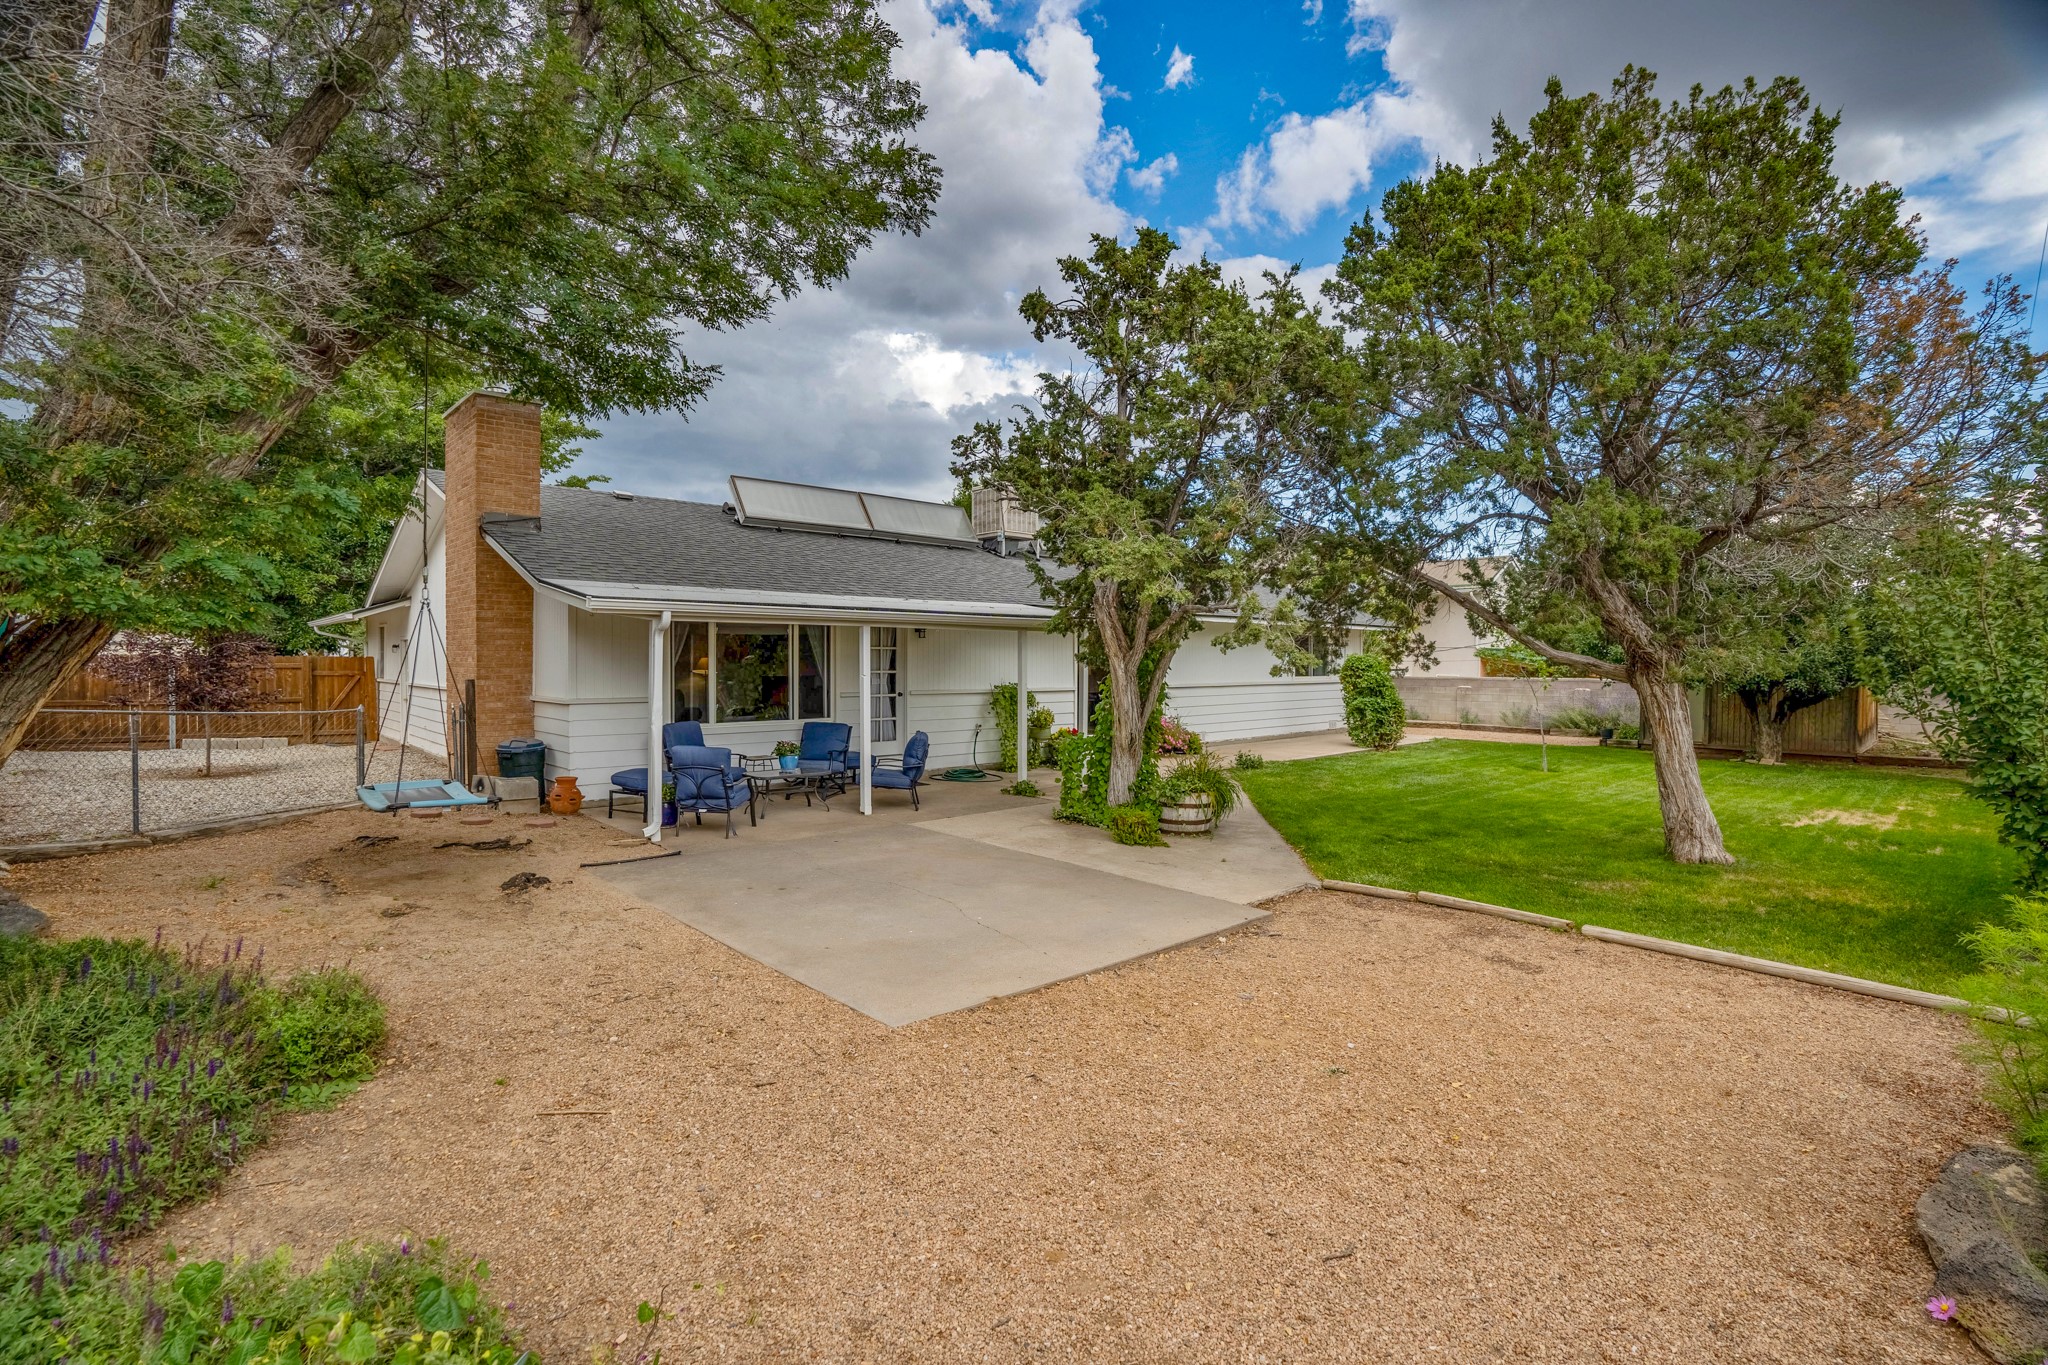 127 Grand Canyon Drive, White Rock, New Mexico 87547, 4 Bedrooms Bedrooms, ,2 BathroomsBathrooms,Residential,For Sale,127 Grand Canyon Drive,202232710